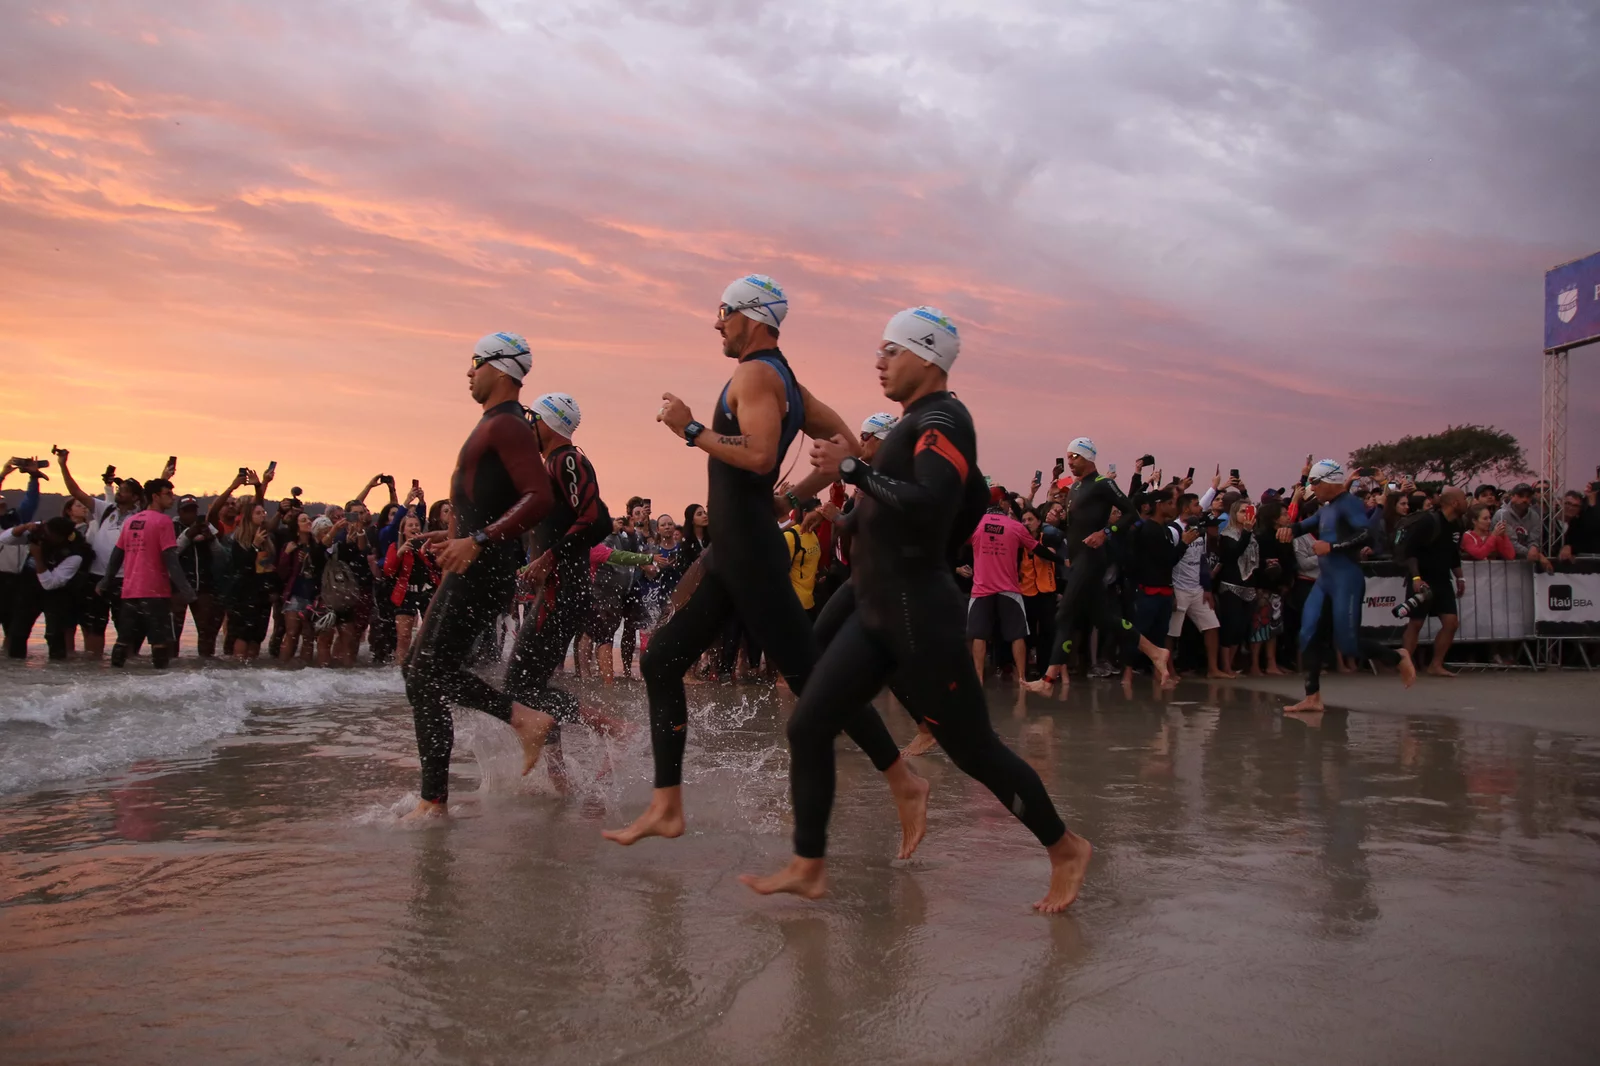 IRONMAN Brazil - Anything is Possible